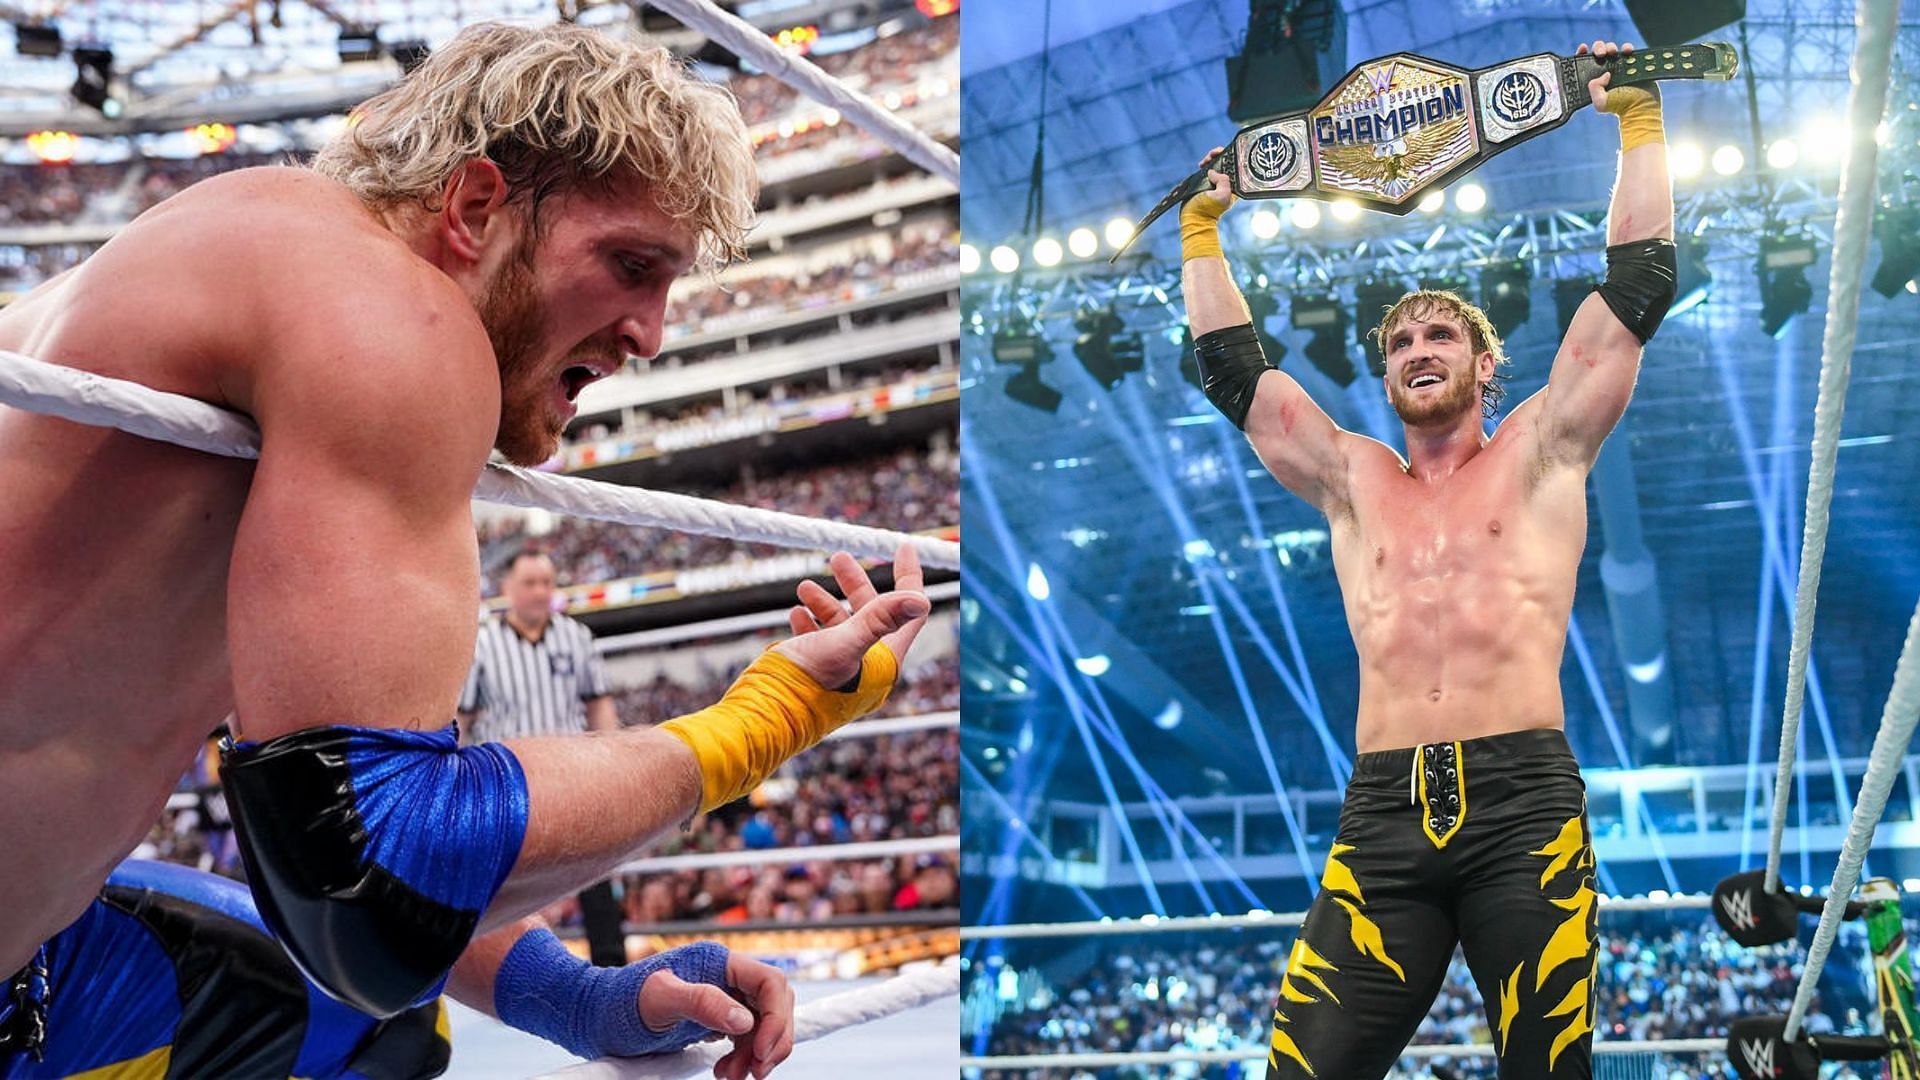 Two superstars assist Logan Paul backstage after he was attacked, WWE star makes a rare appearance